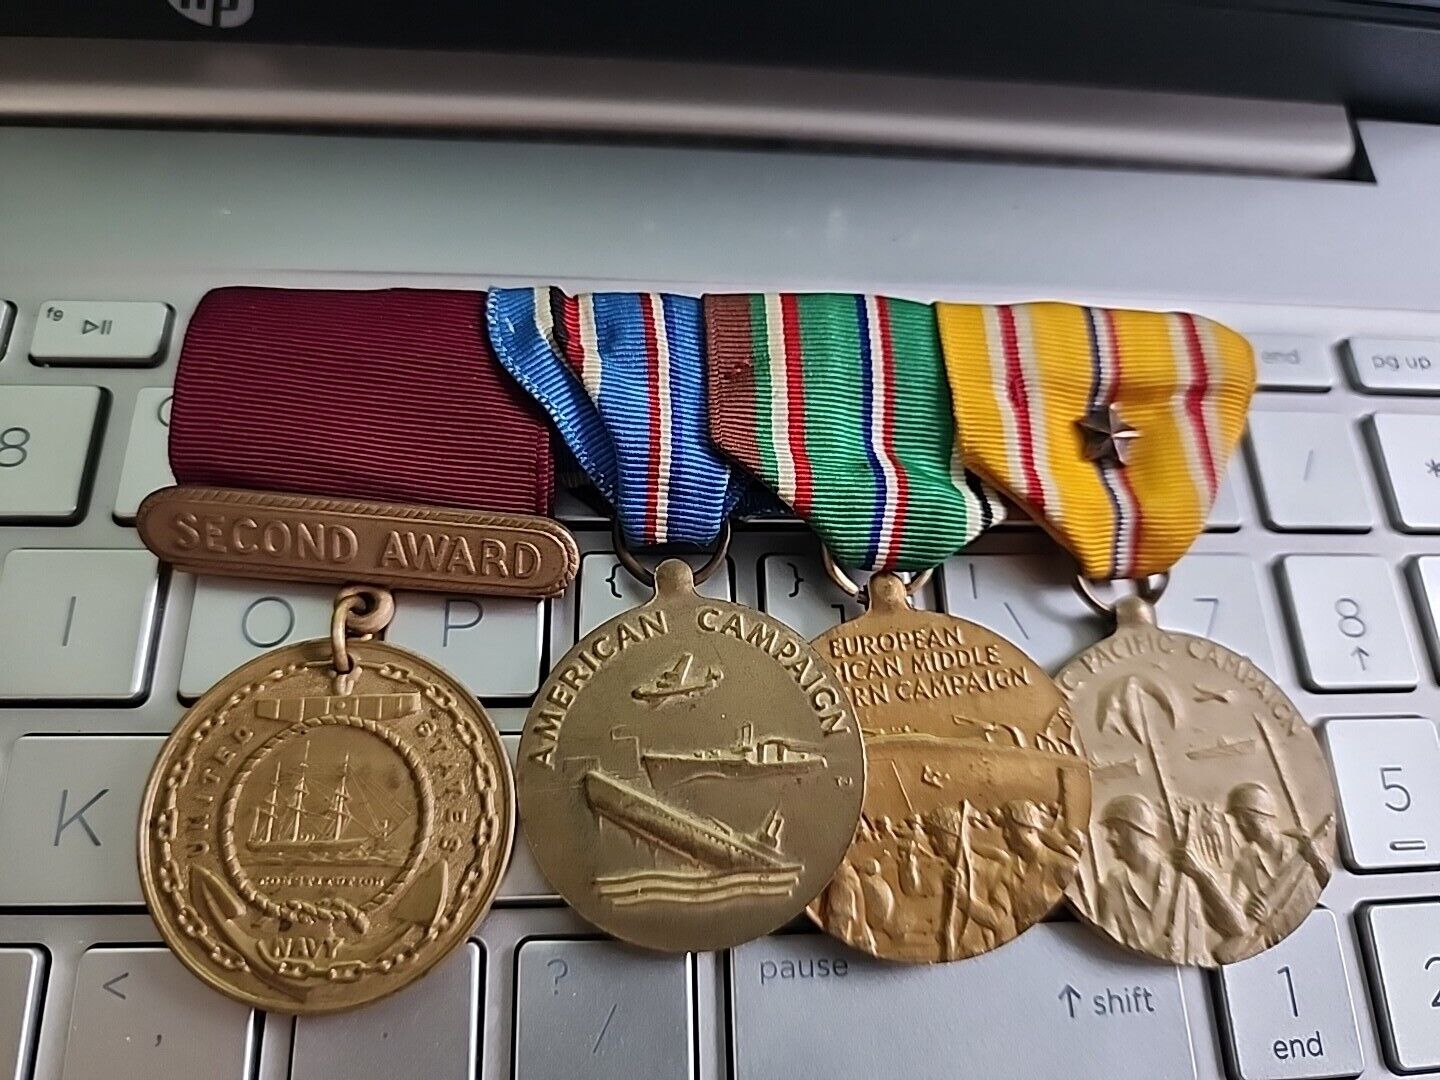 ORIGINAL NAMED + MOUNTED WW2 NAVY WAR SERVICE MEDALS W/ ENGRAVED GOOD CONDUCT